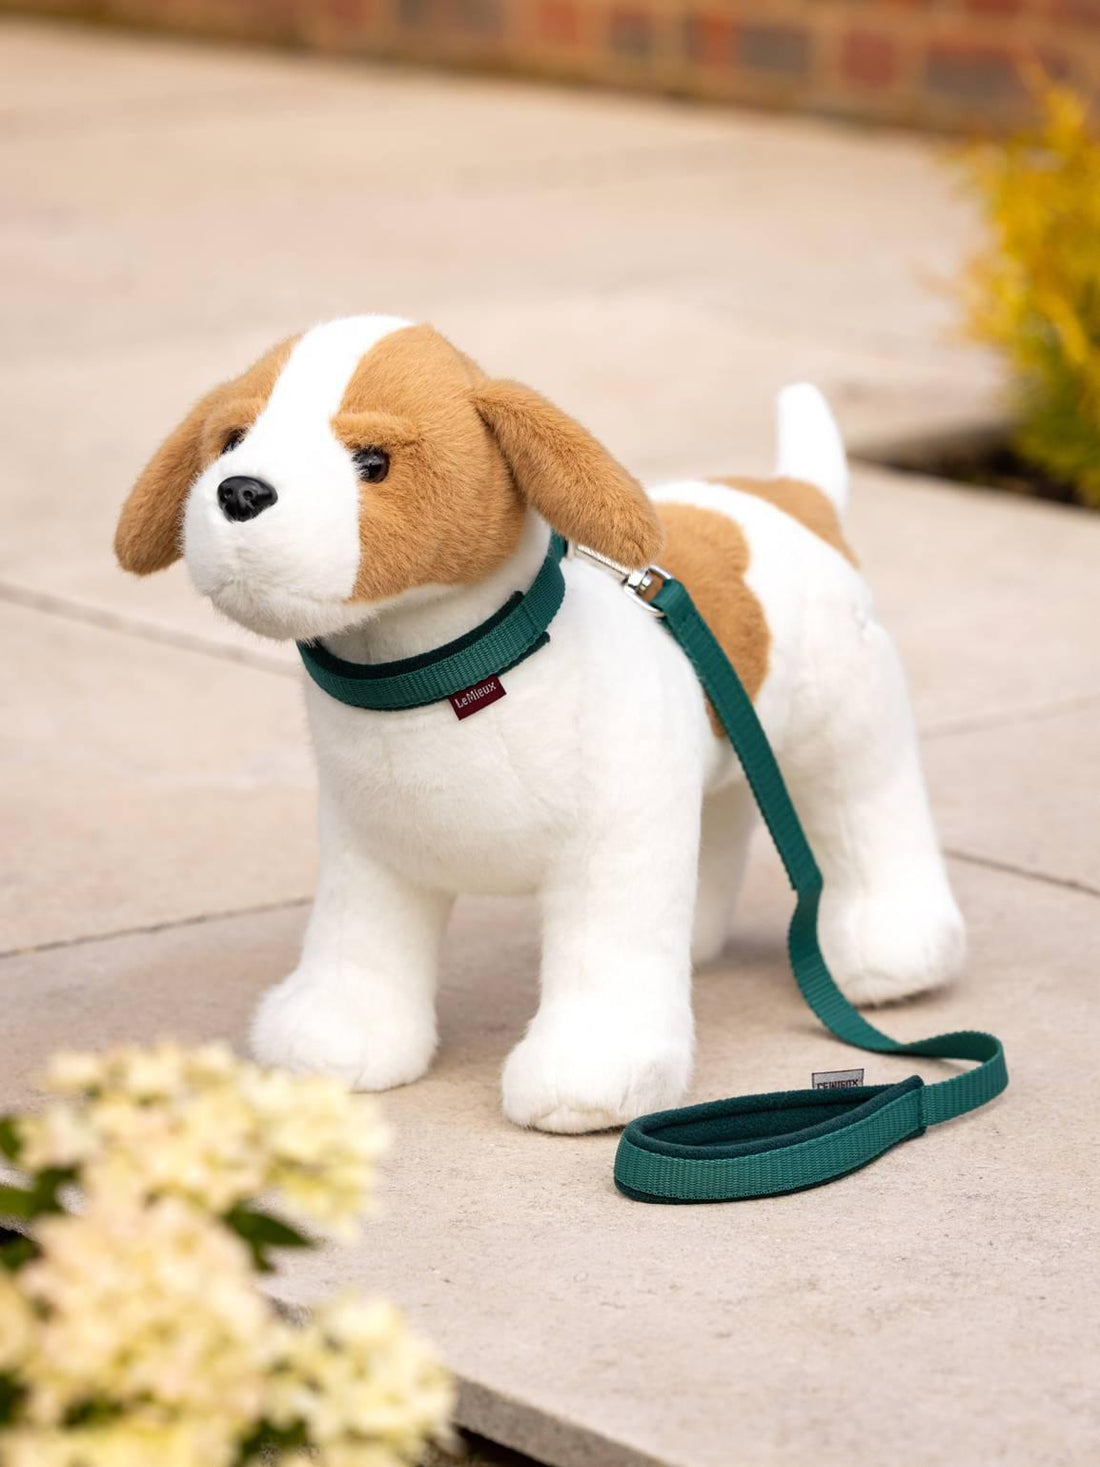 LeMieux toy puppy collar and lead - HorseworldEU